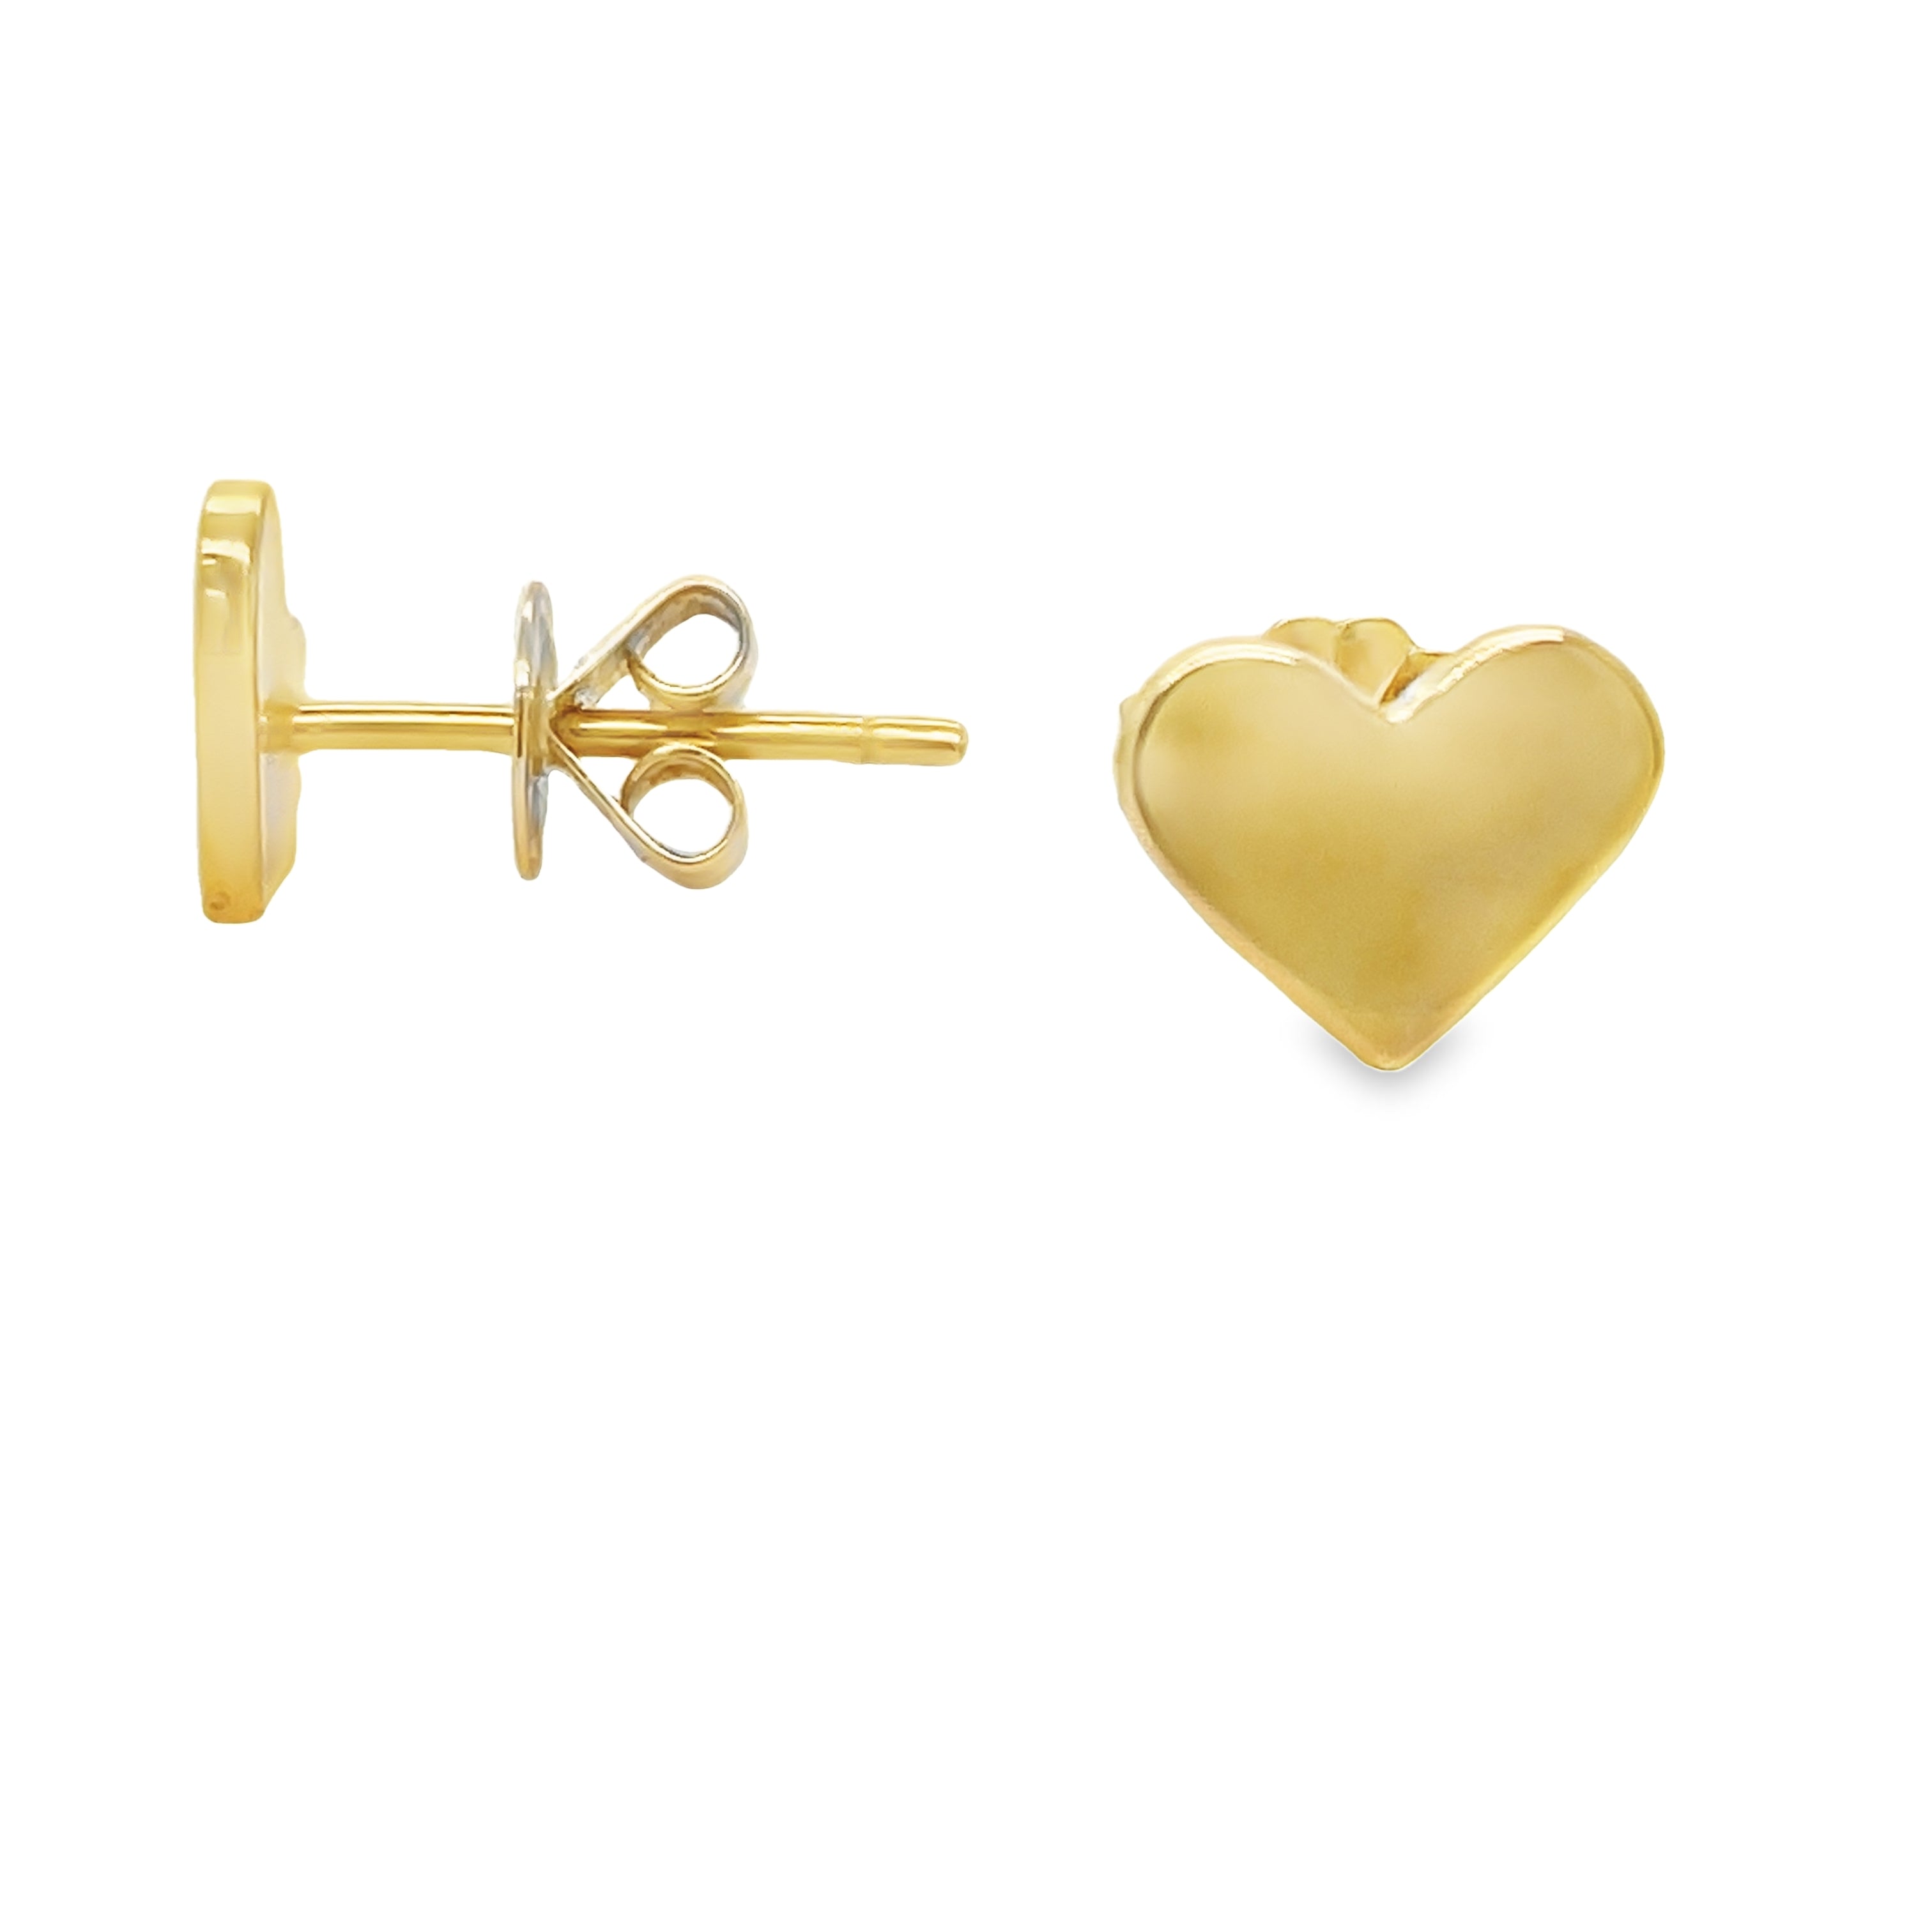 Fall in love with these 14k Yellow Gold Heart Earrings! The heart shape and 6.00 mm size make for a dainty and elegant look. The secure friction backs will keep these beauties safely in place, so you can wear them all day with confidence. A must-have addition to any jewelry collection!